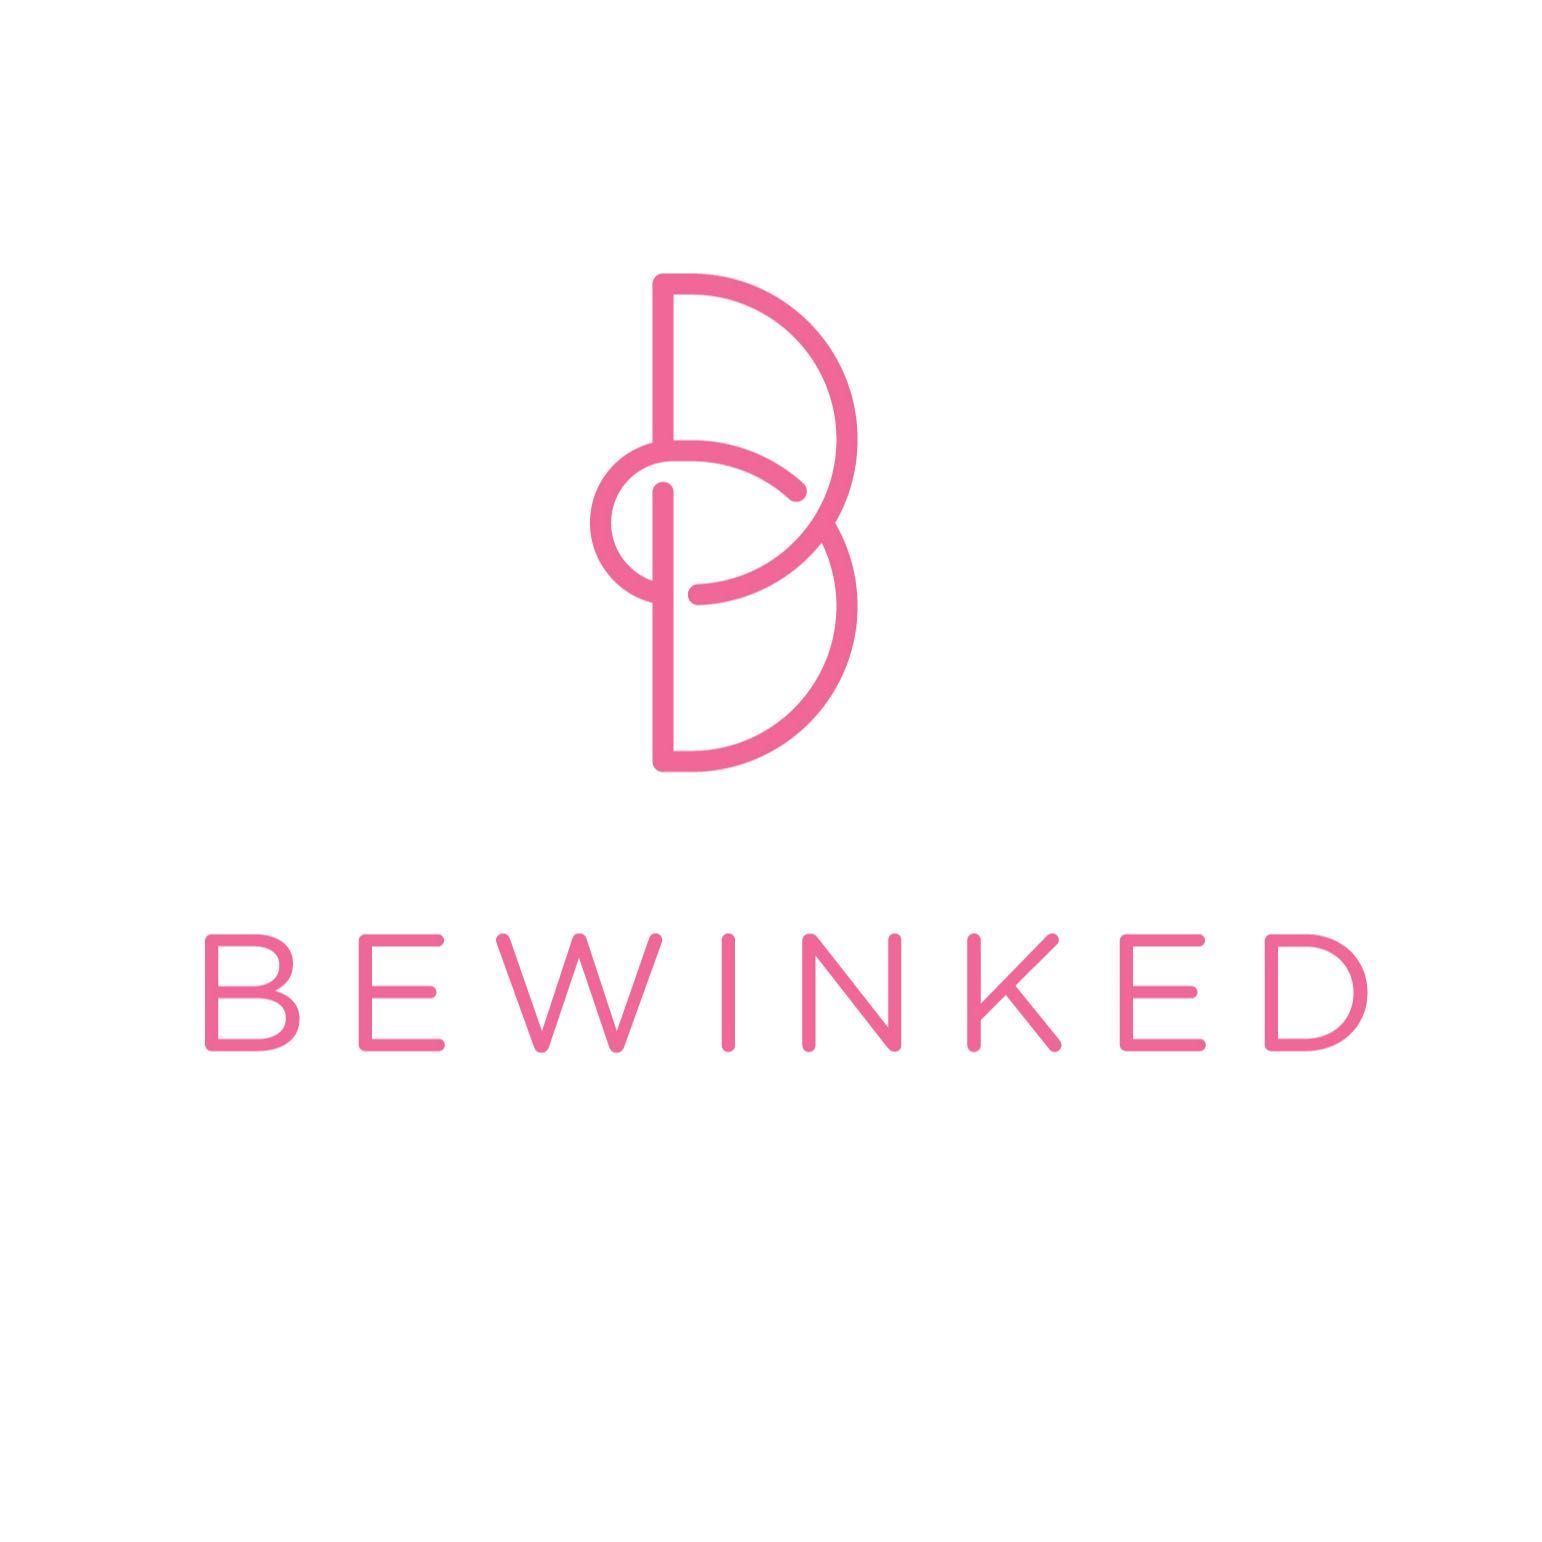 Bewinked, 5524 Bee Cave Rd, Suite F-1, Austin, 78746